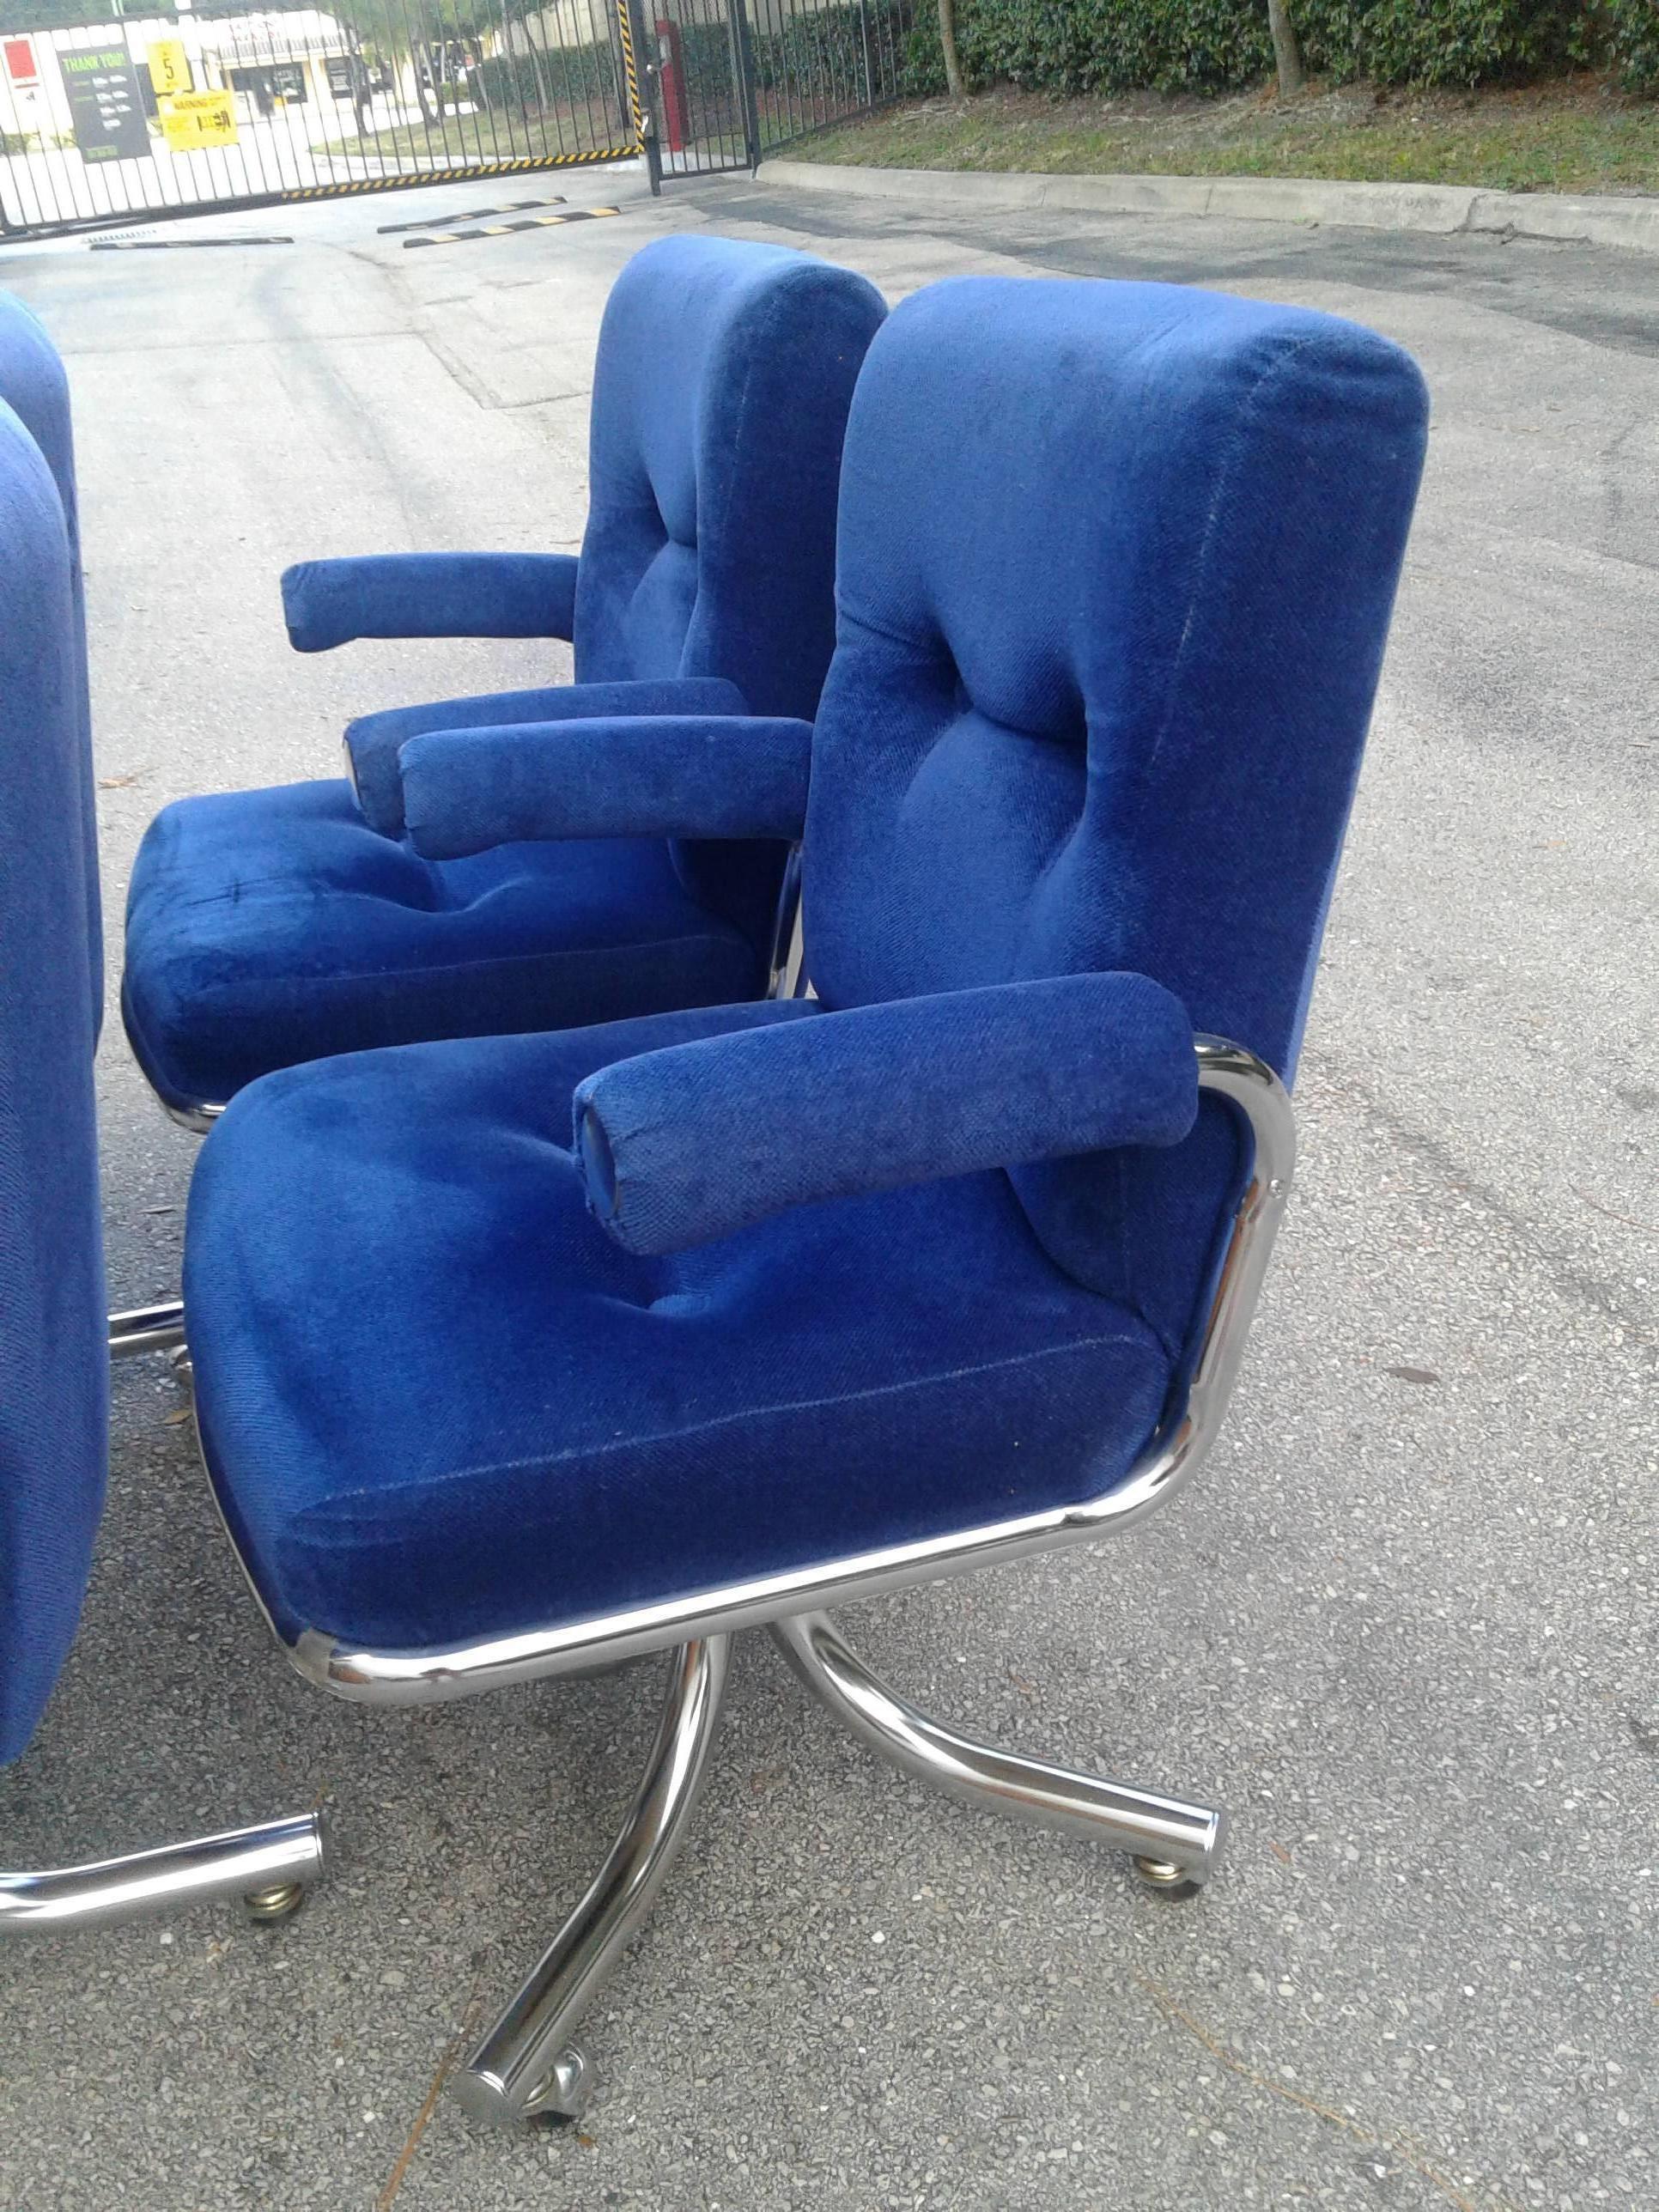 Chrome Swivel Arm Chairs Vintage Blue Desk Dining Hollywood Regency Individually 4